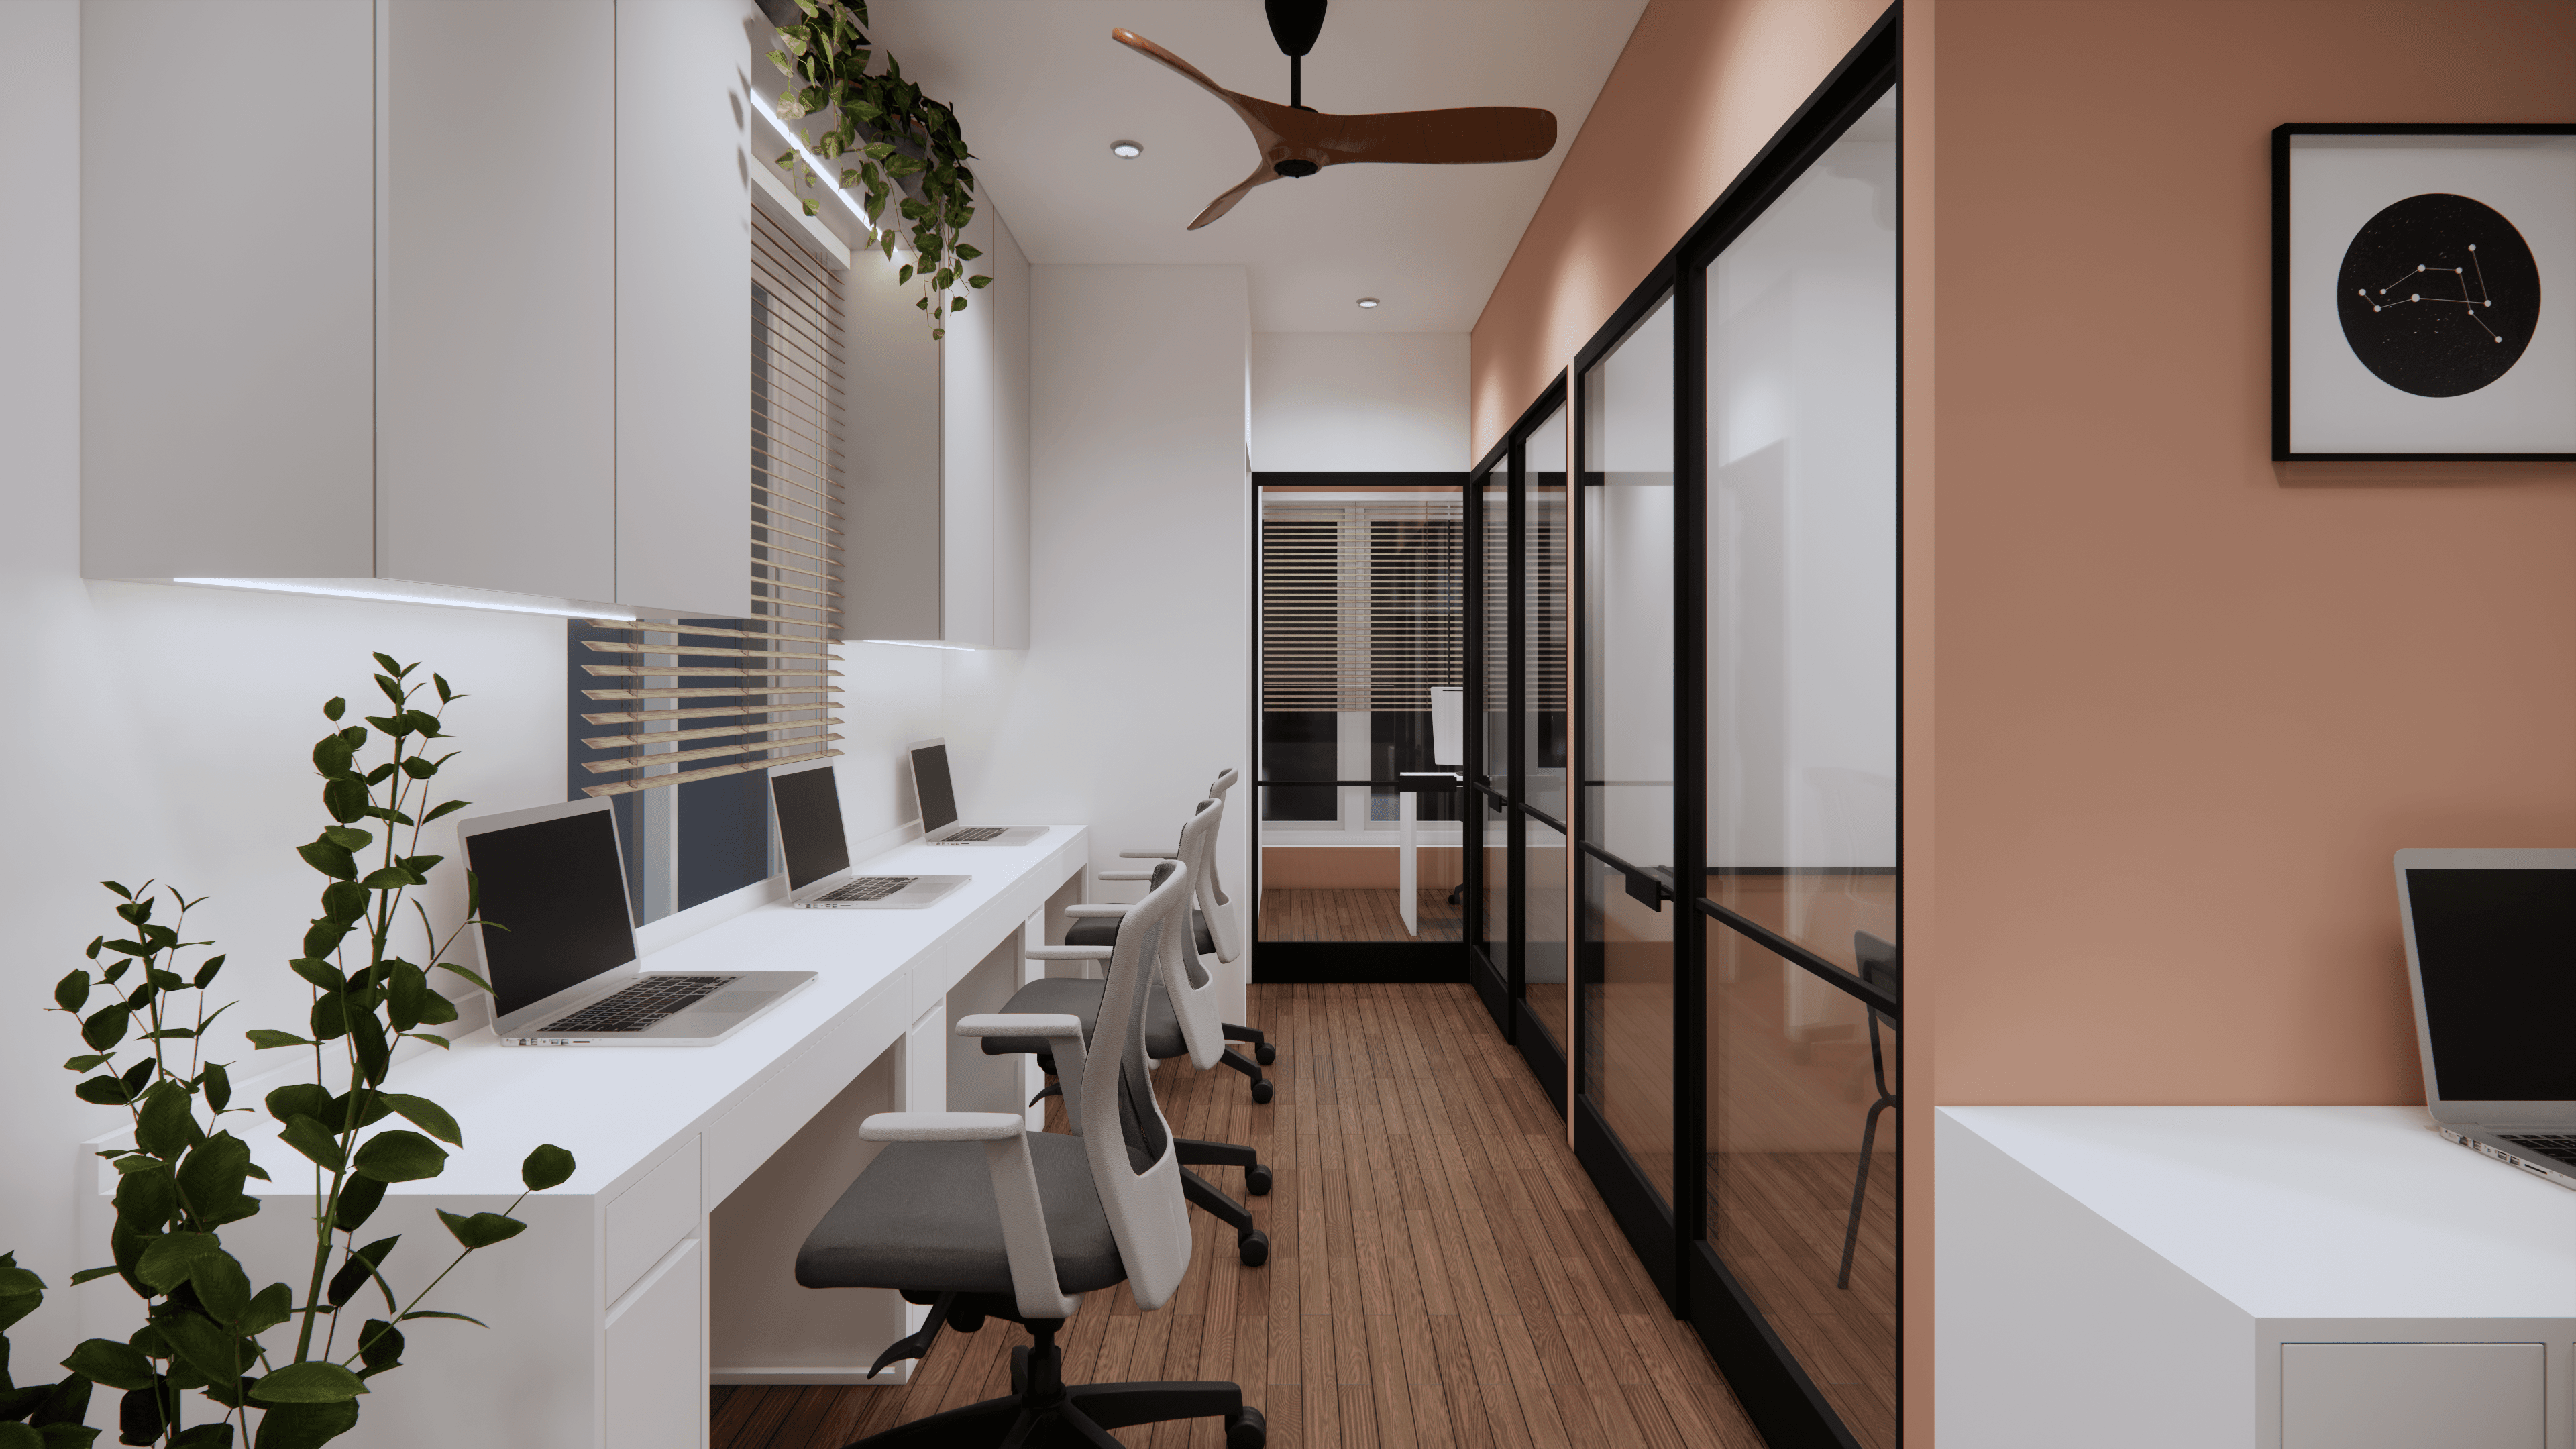 Small Office Space